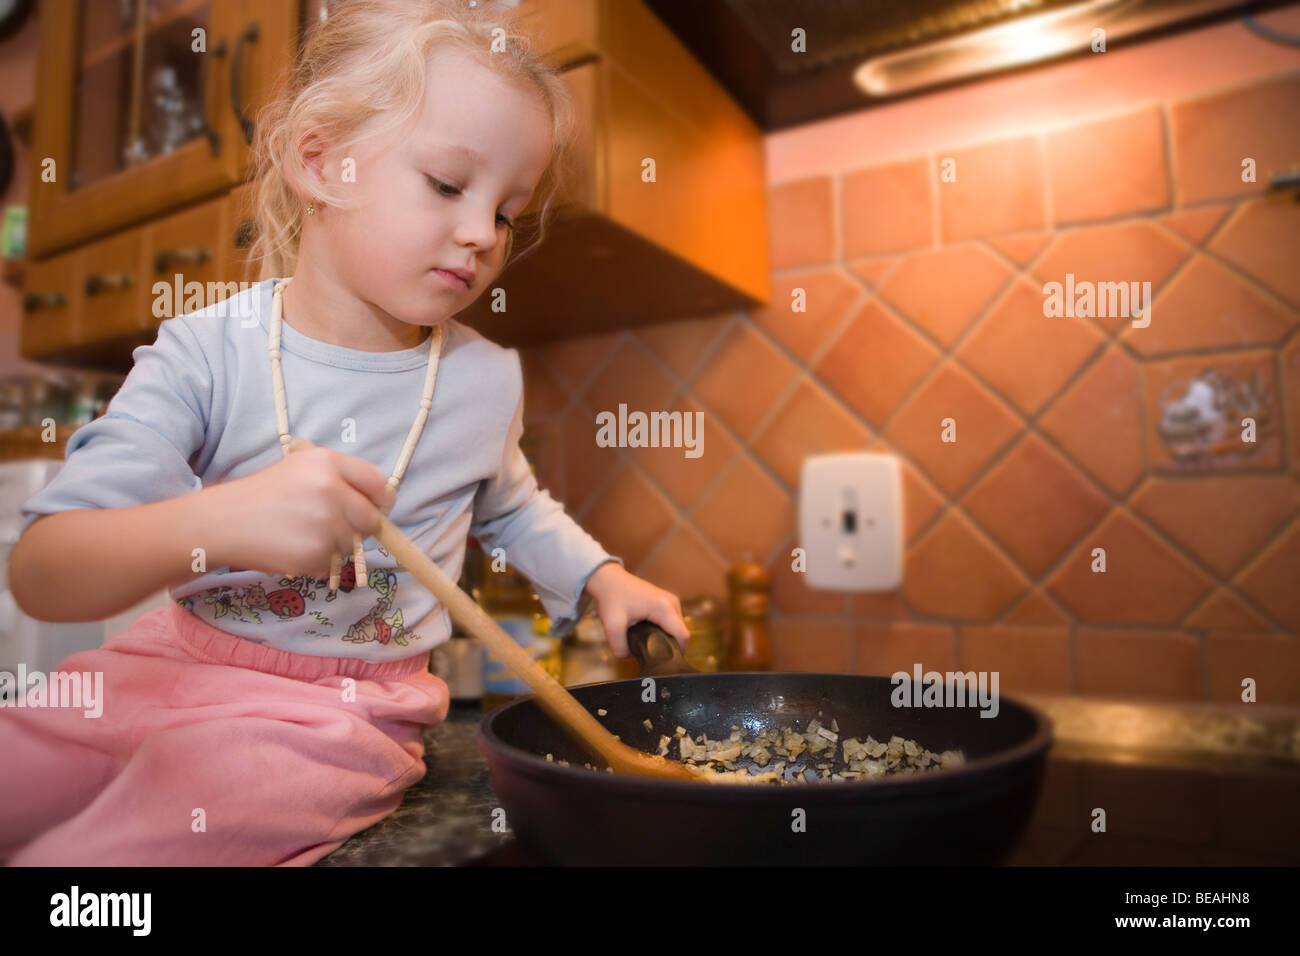 A little girl cooking. Stock Photo